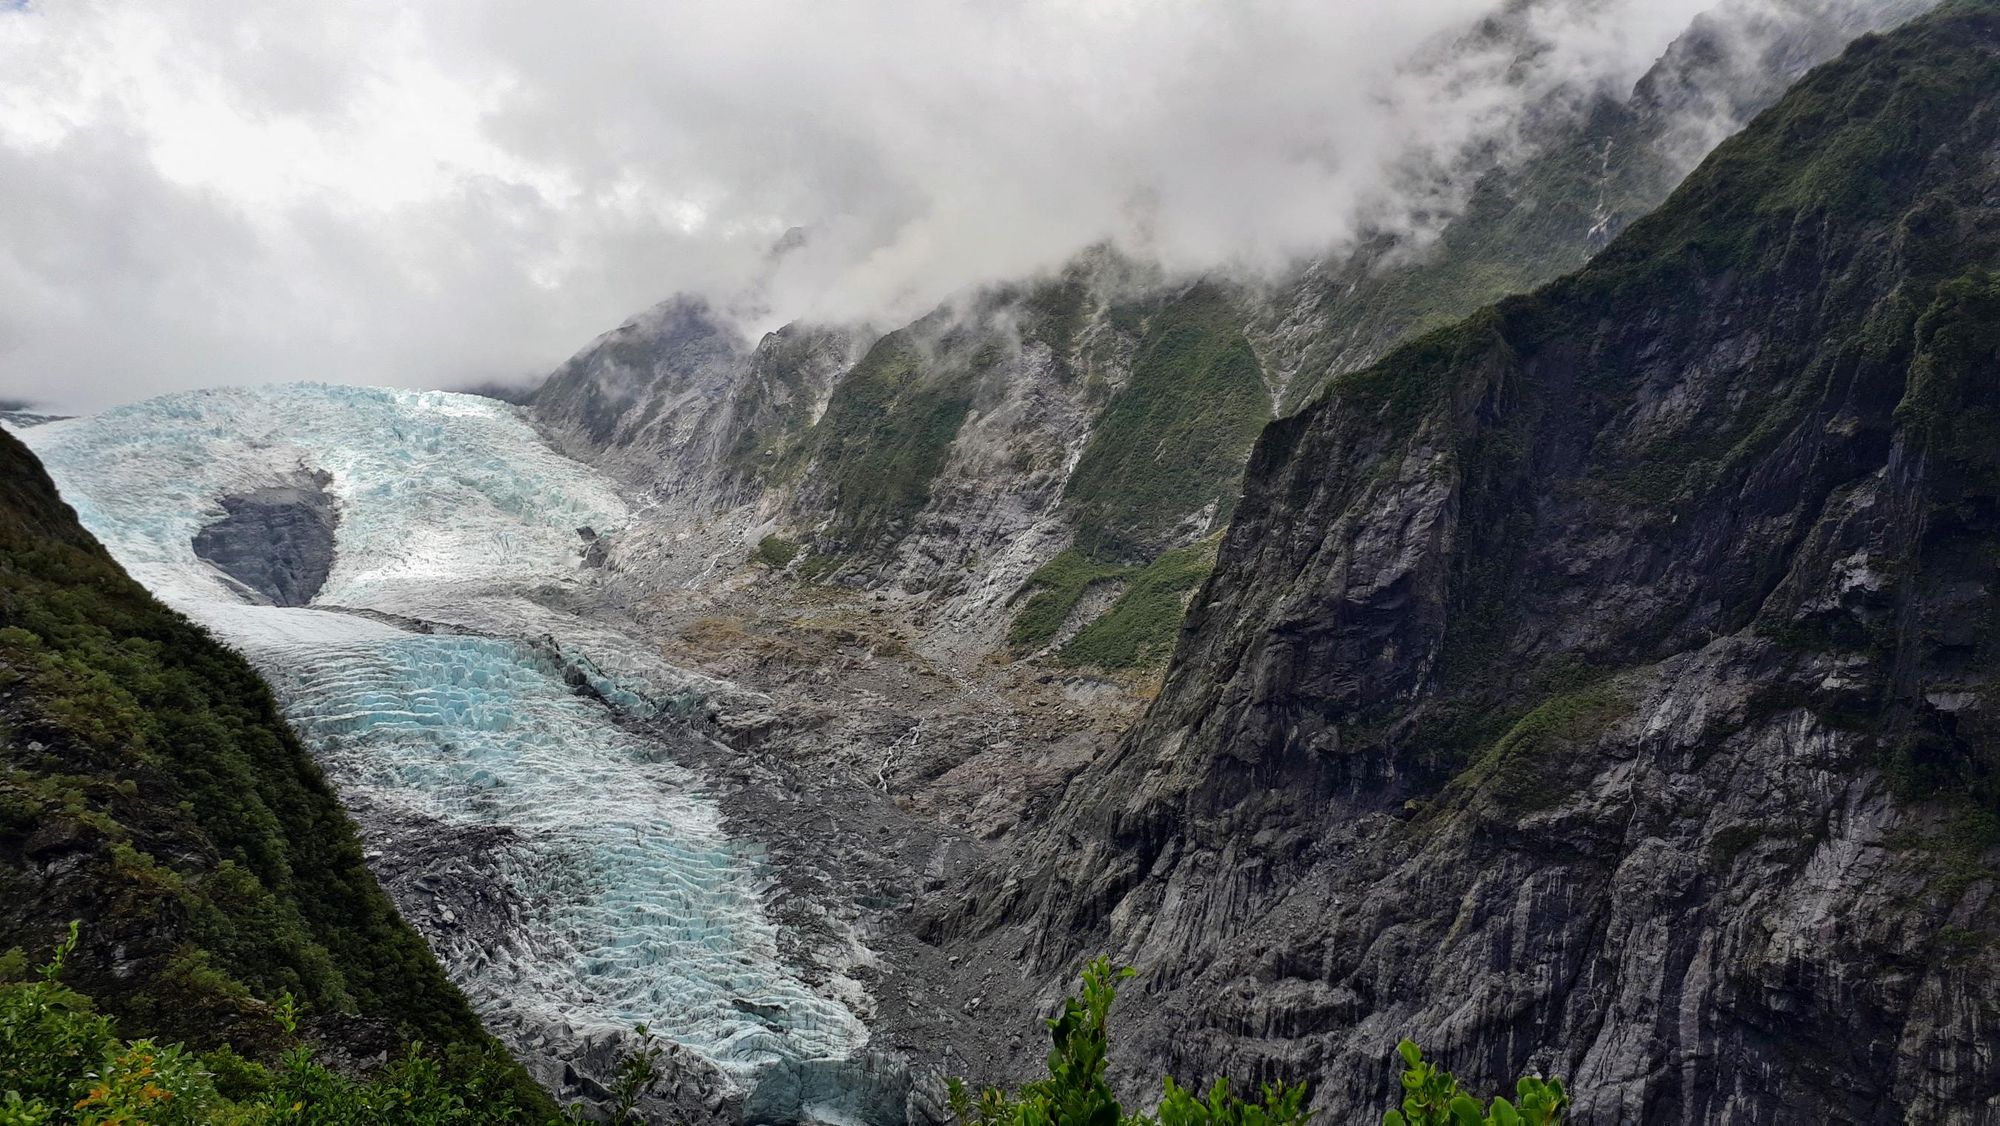 A view of Franz Josef Glacier from the lookout point. Photo: Dani Redd.